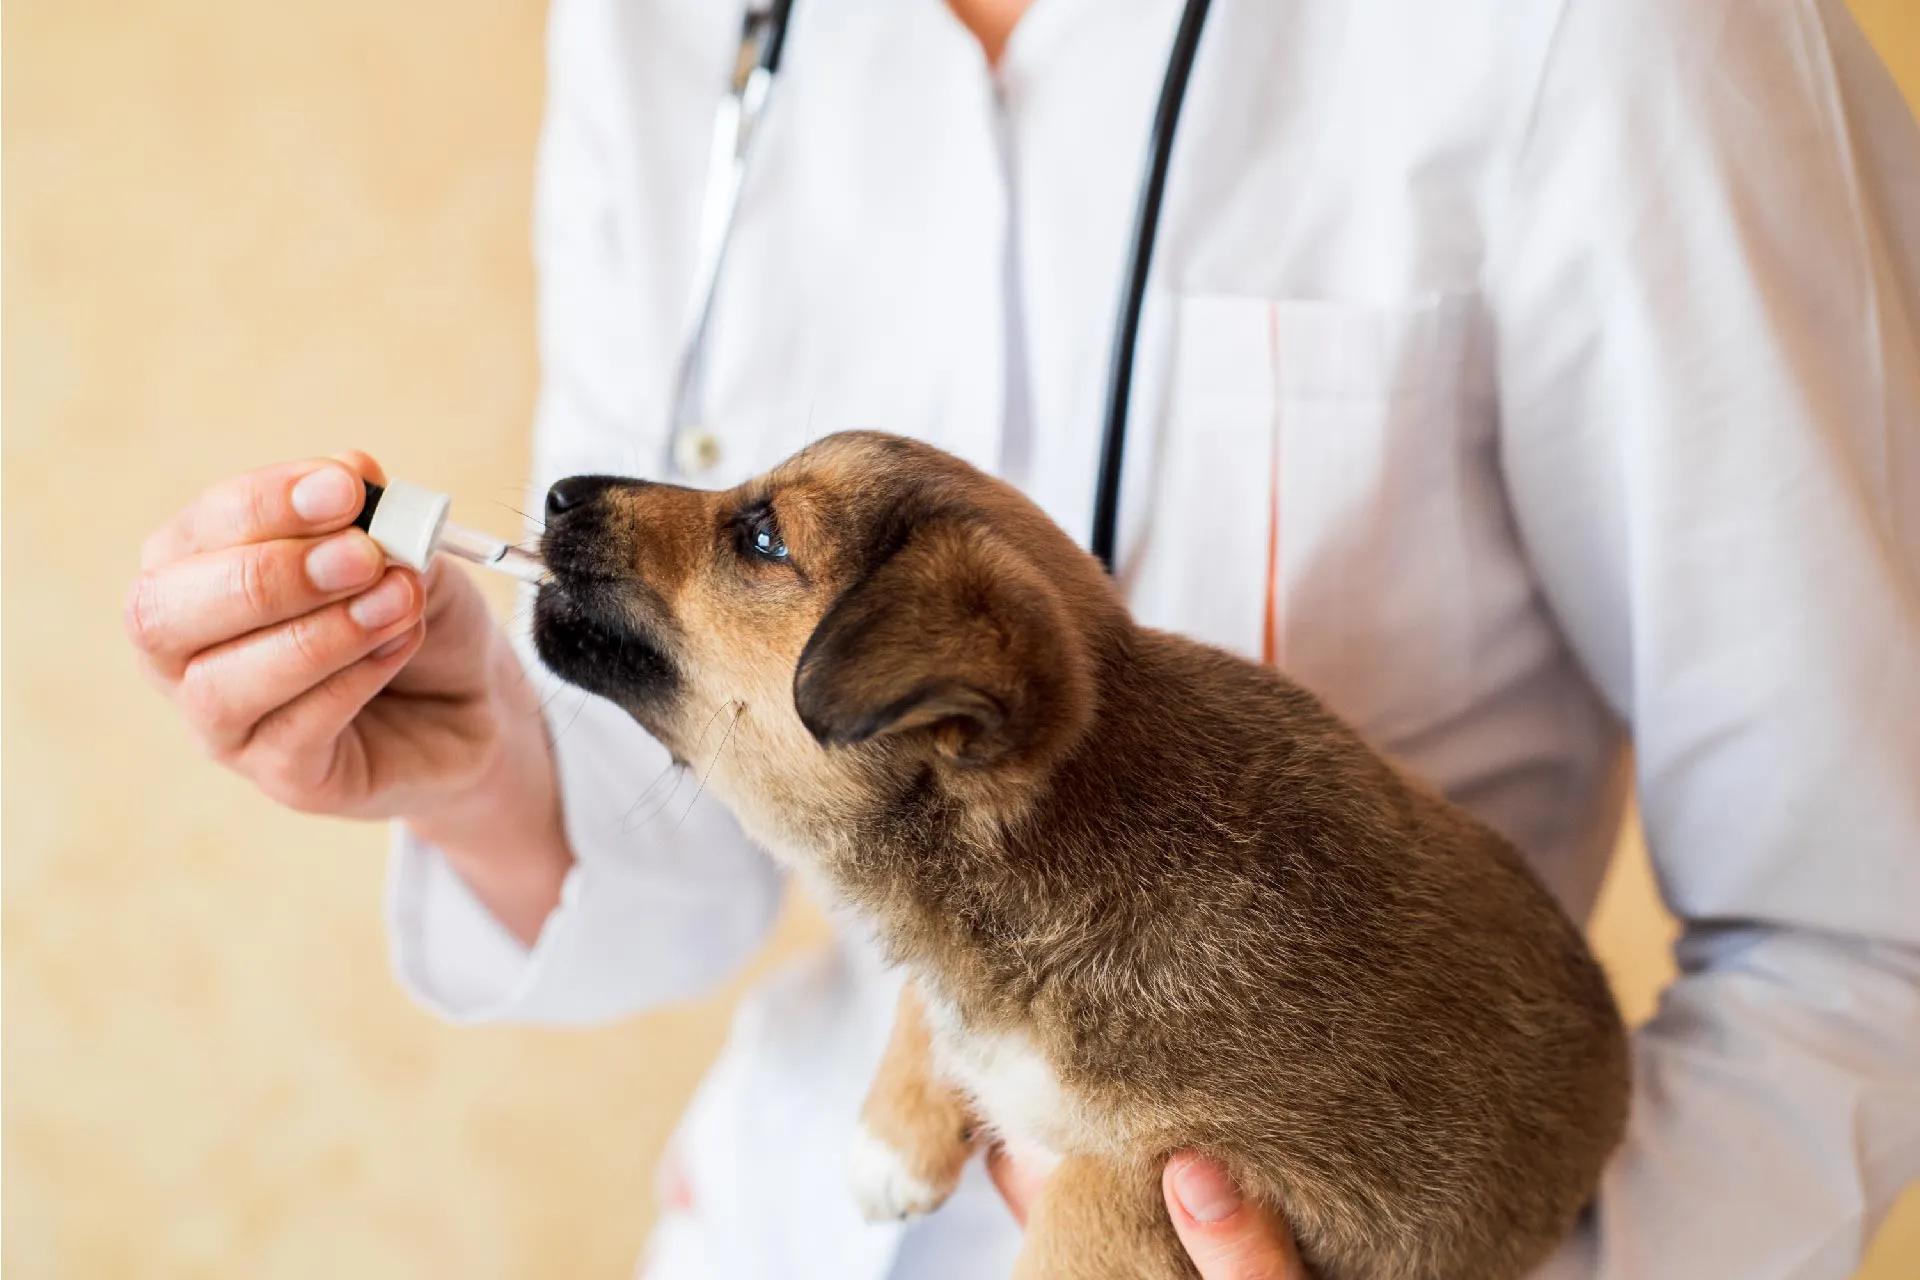 World Rabies Day: All That You Need to Know About Rabies